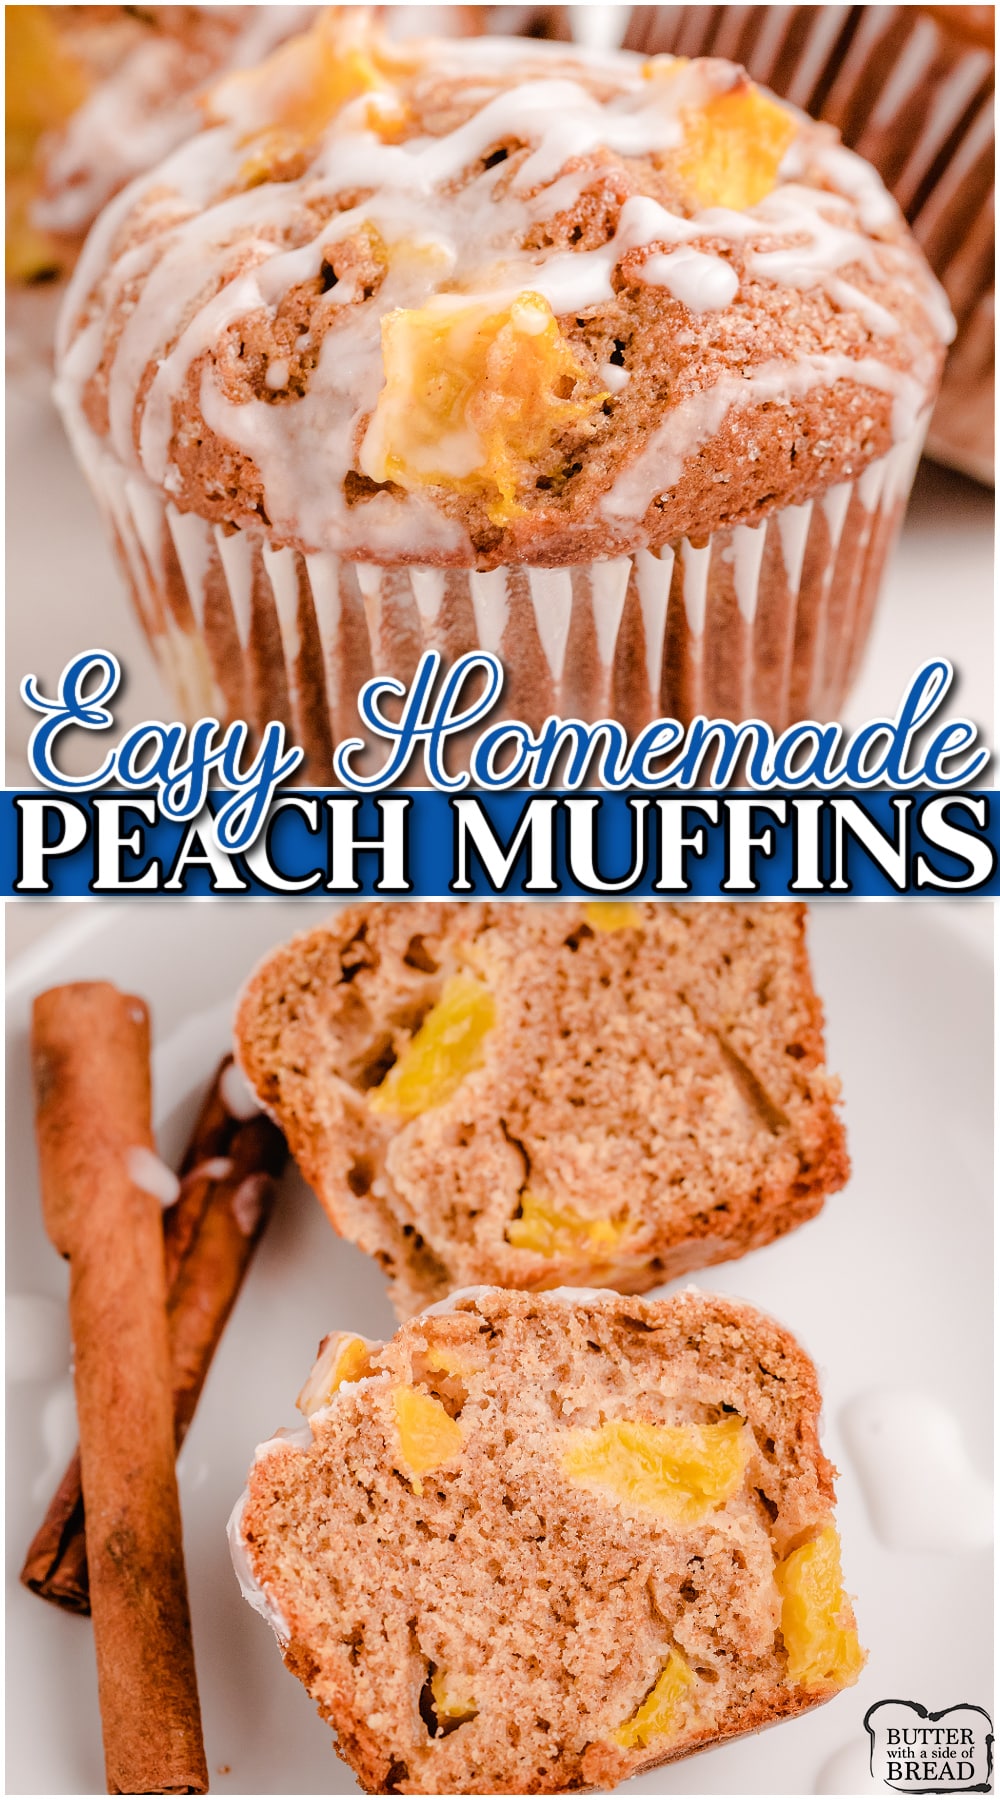 Peach Muffins made with pantry ingredients + fresh juicy peaches! Spiced with cinnamon & topped with a simple glaze, our peach muffins are the best!